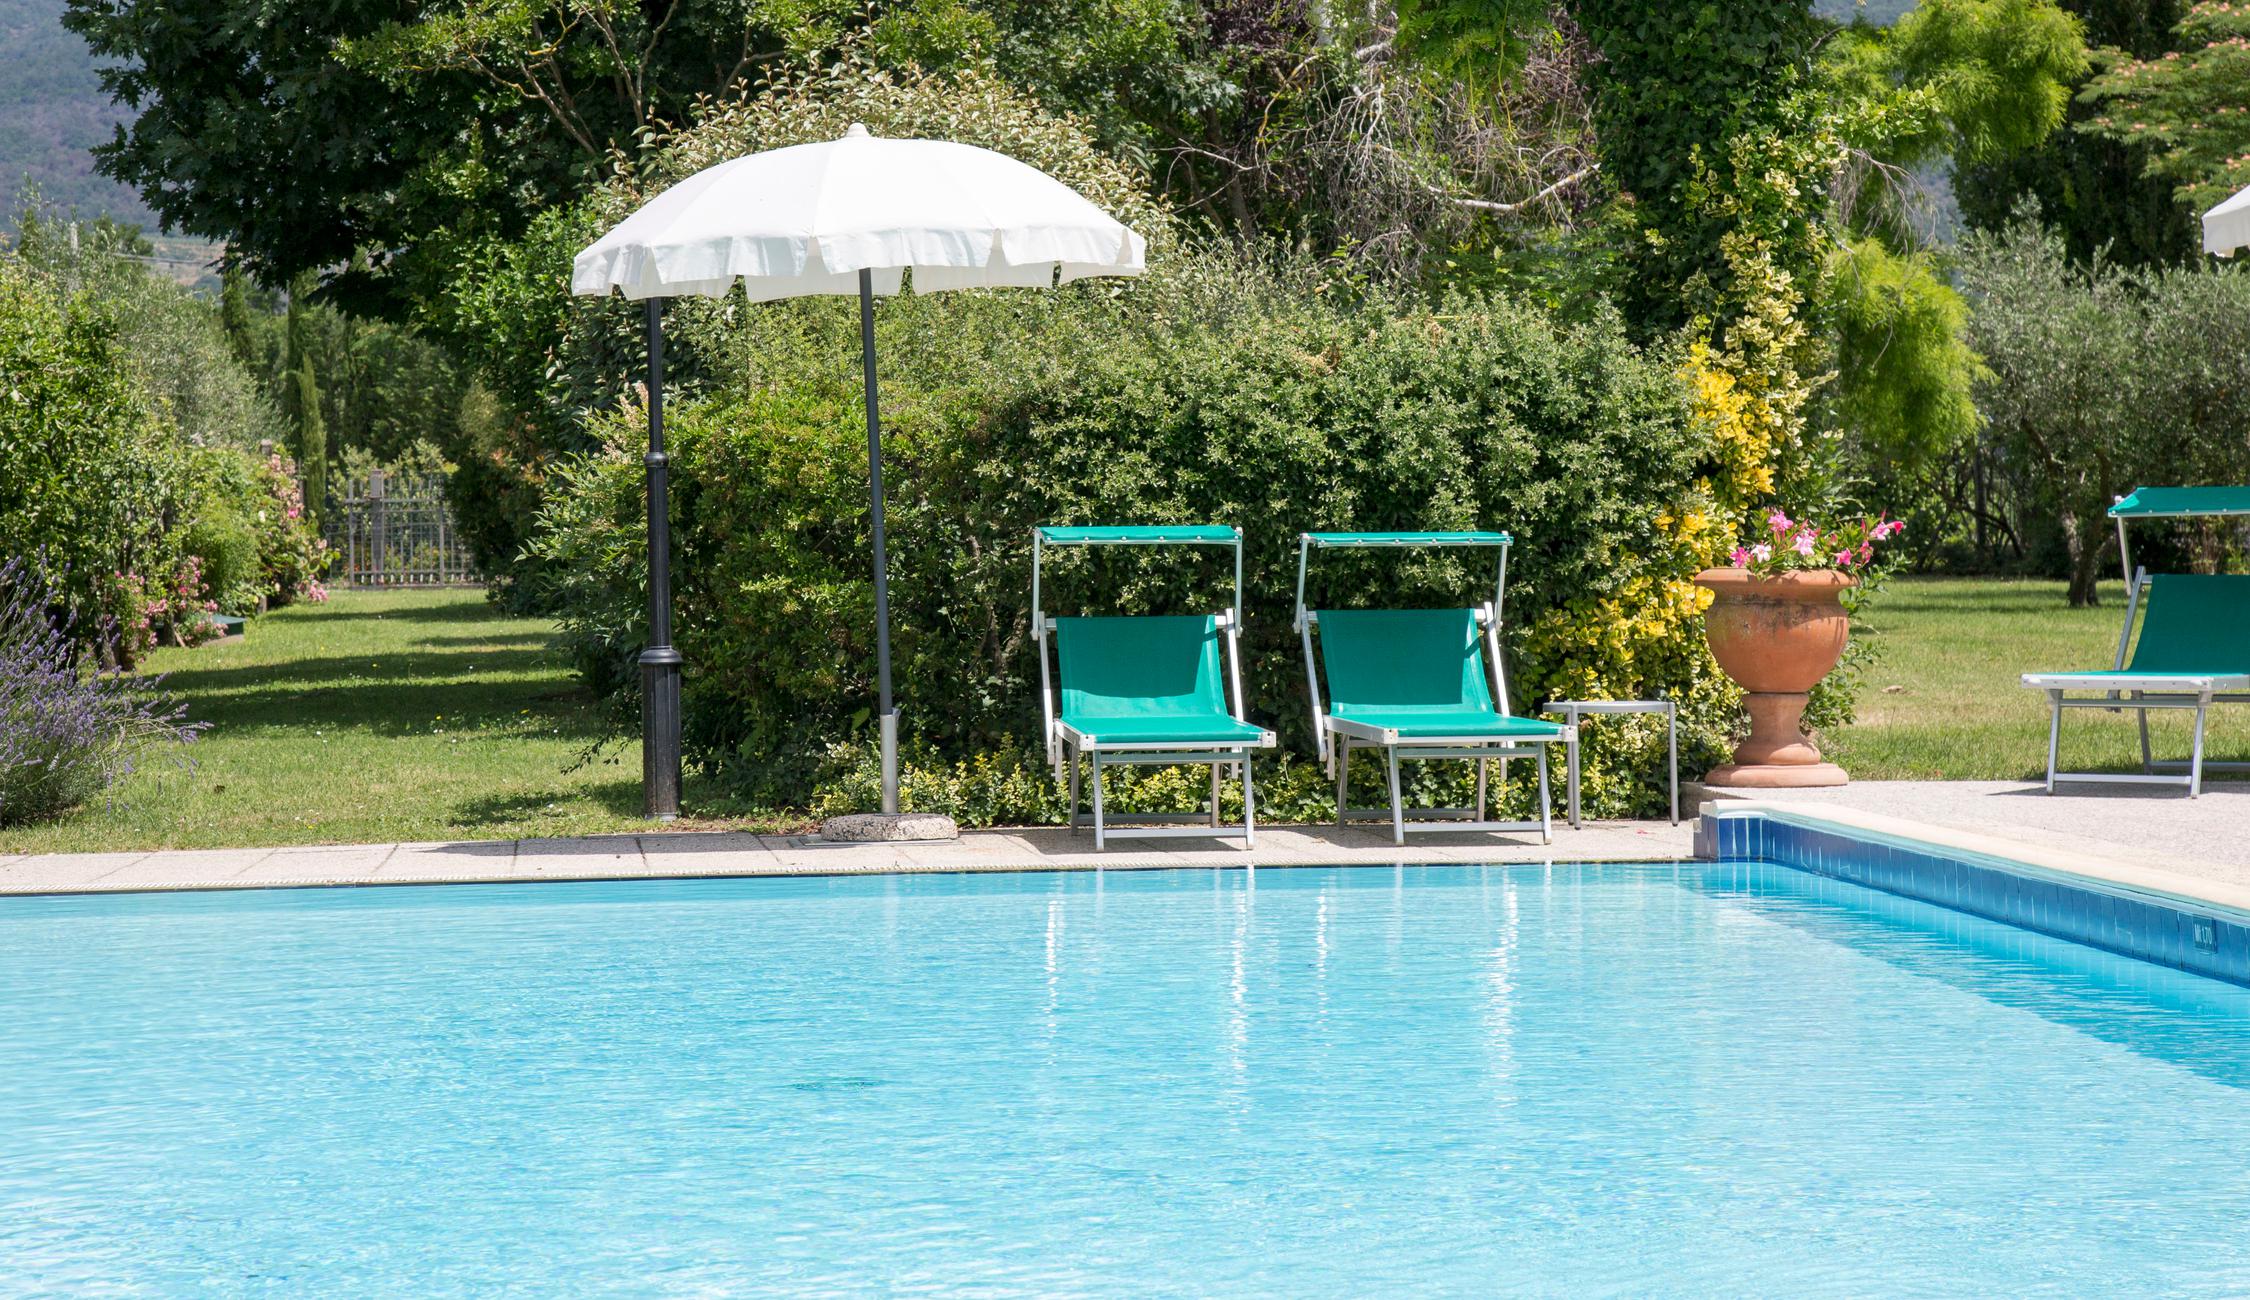 Agriturismo with swimming pool and garden in Cortona